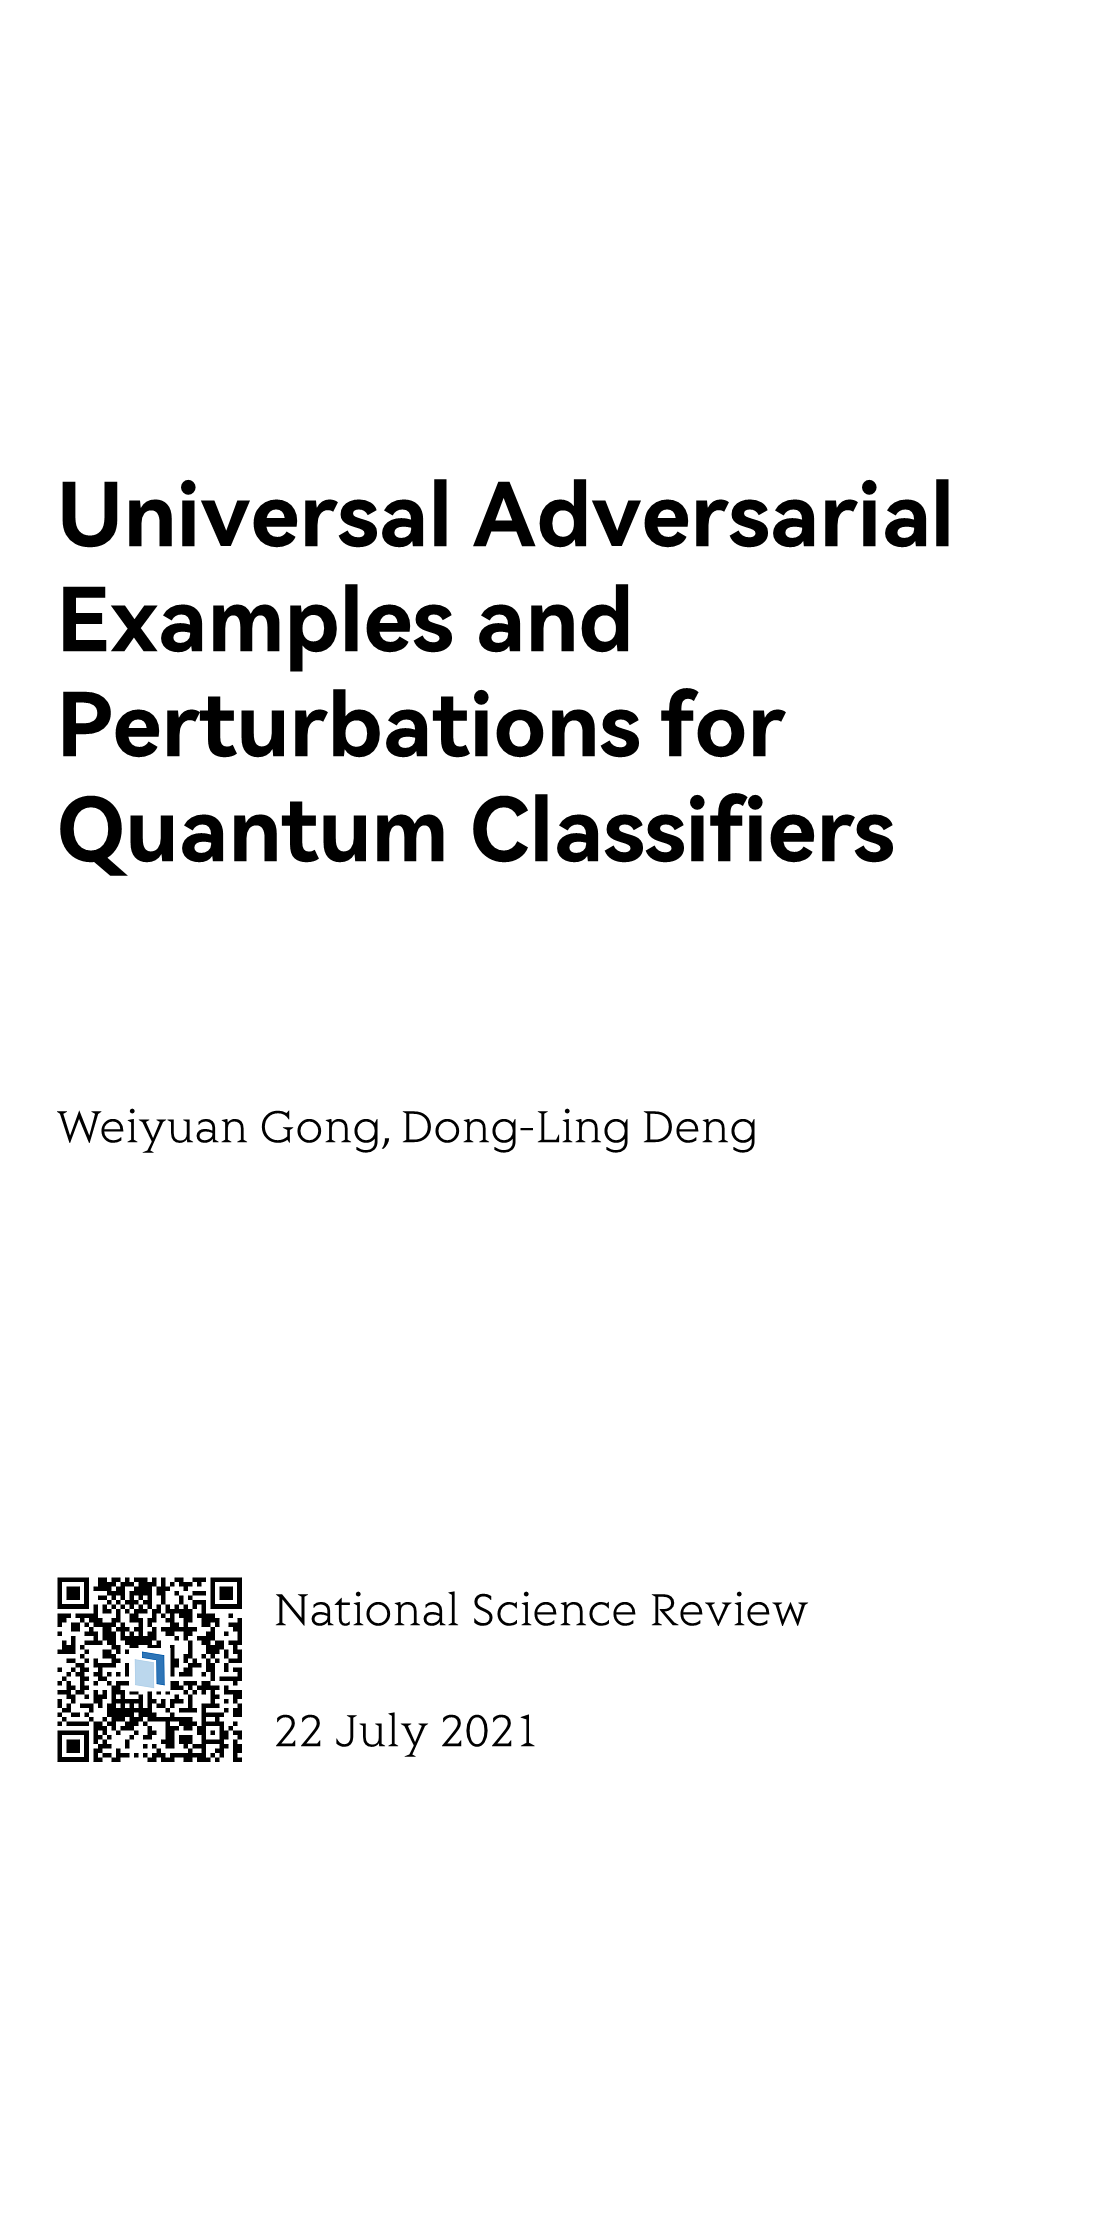 Universal Adversarial Examples and Perturbations for Quantum Classifiers_1